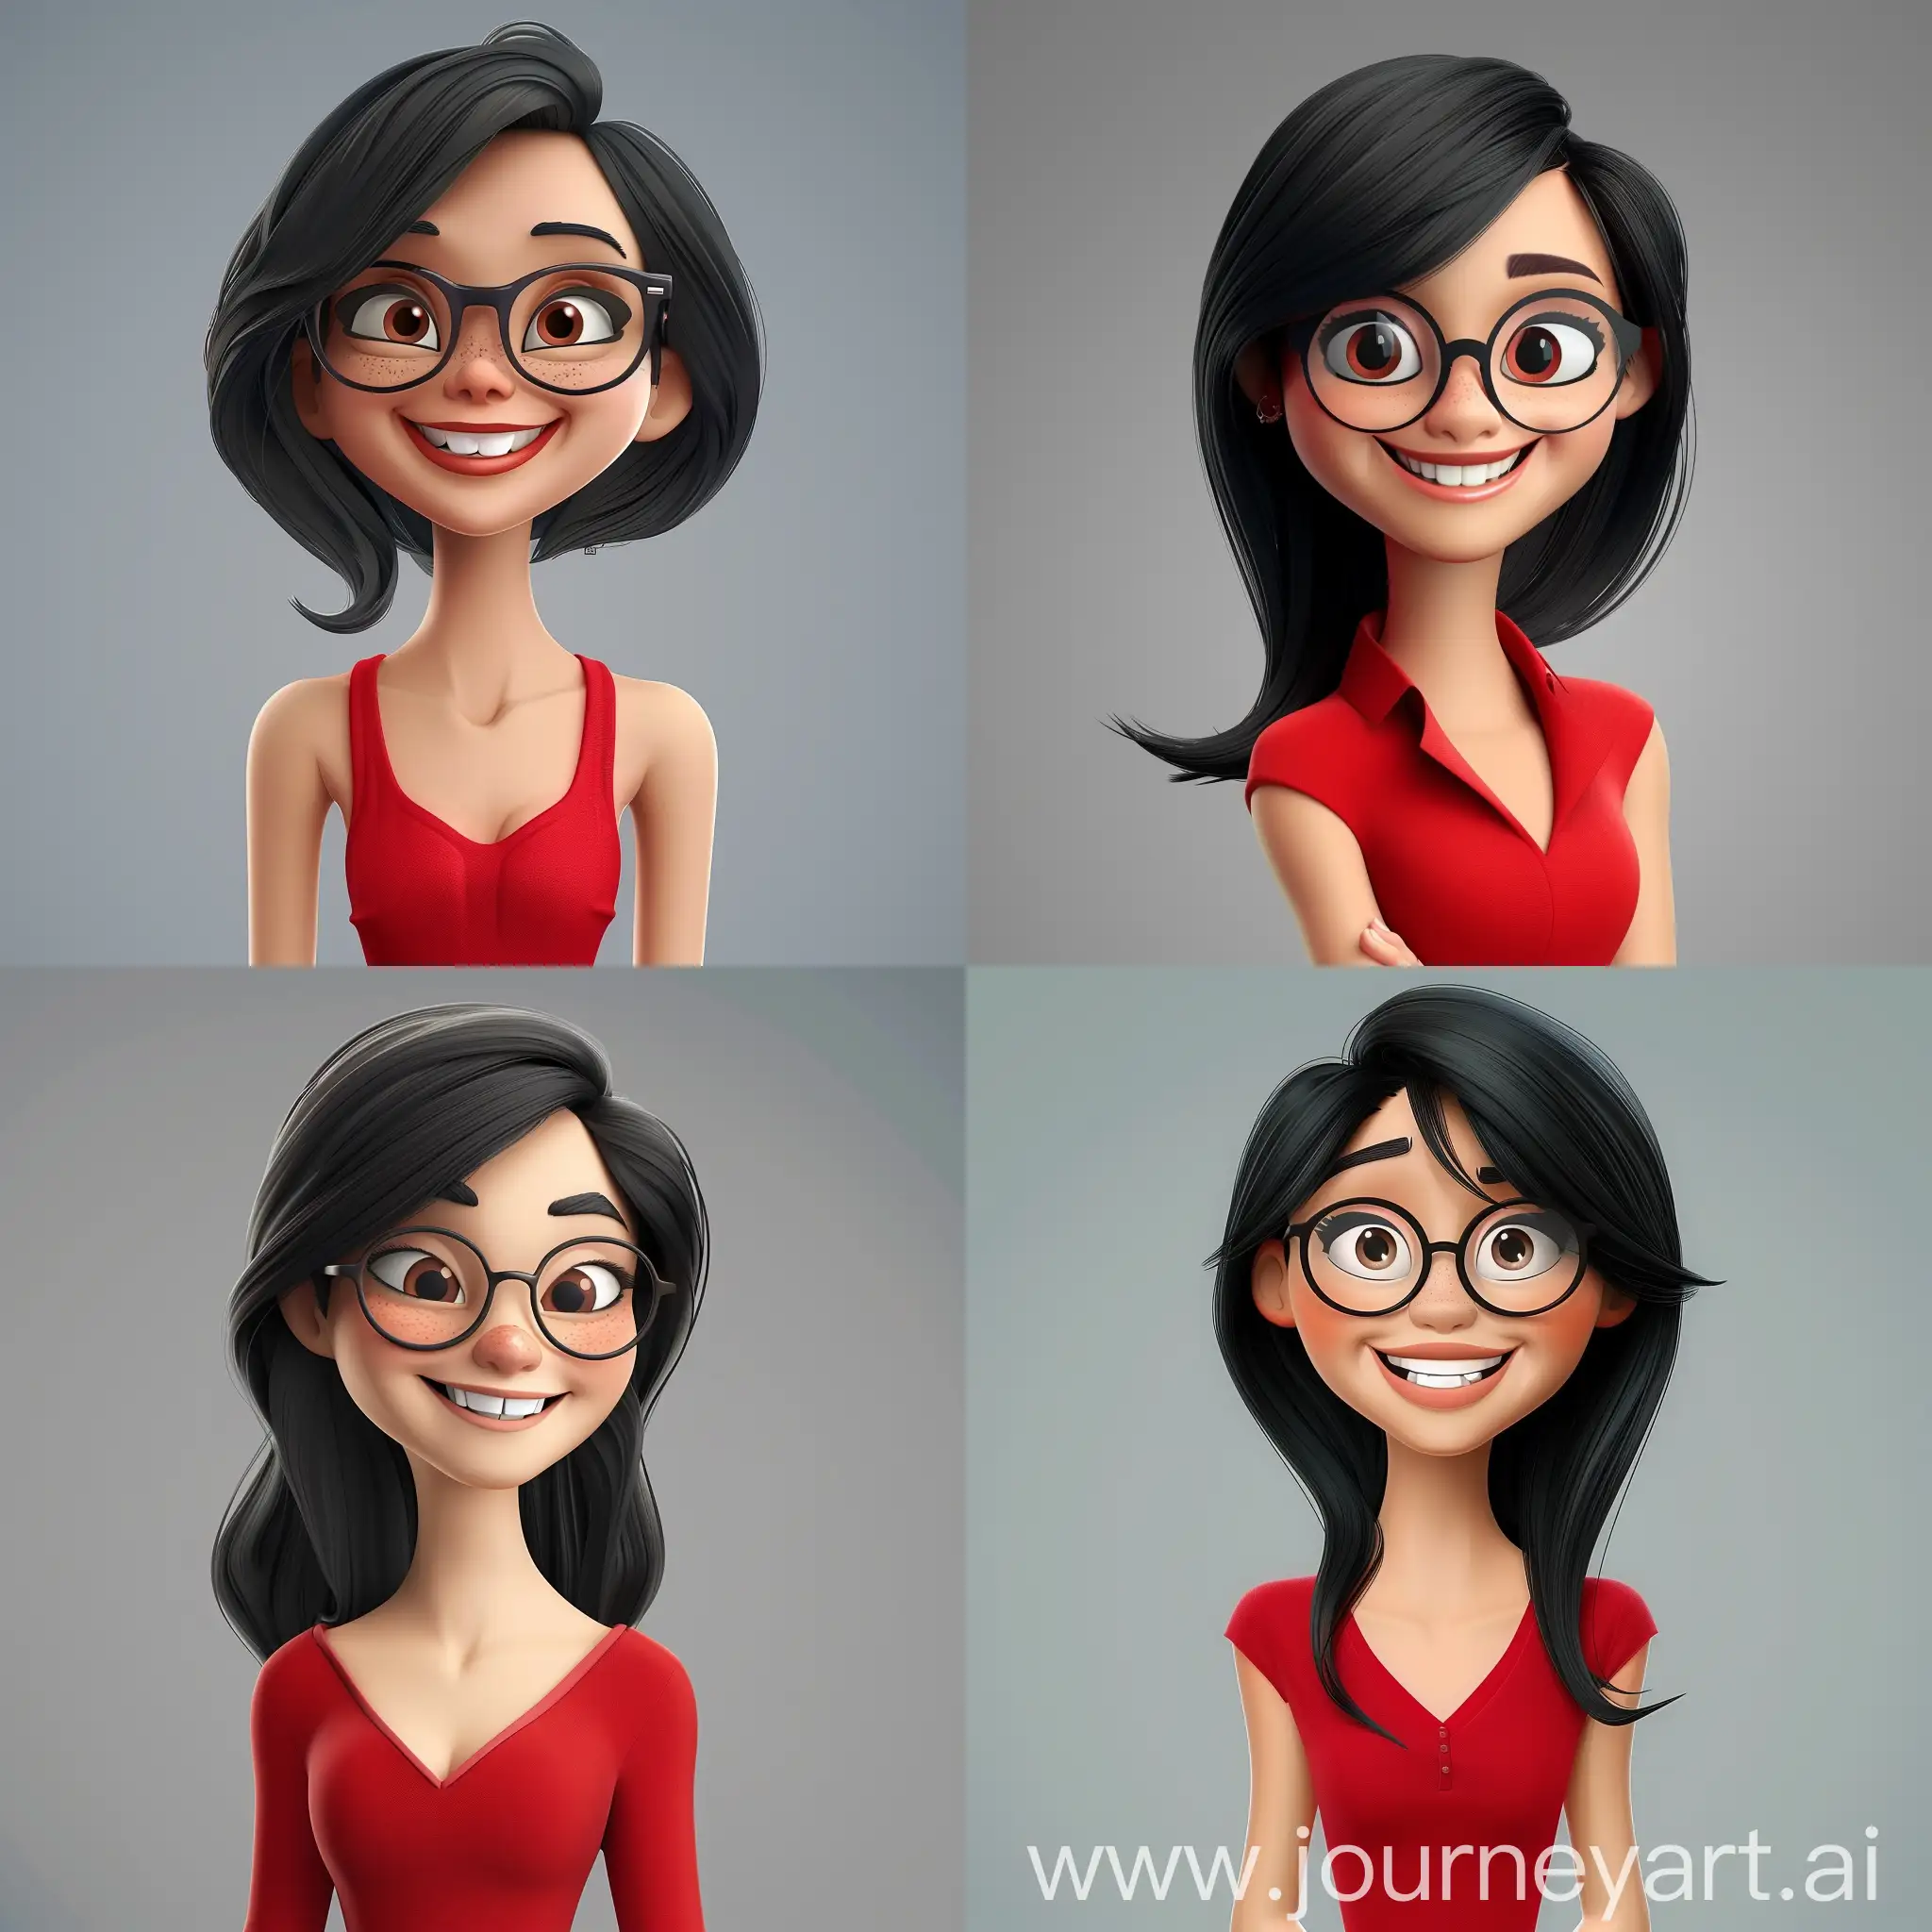 PixarStyle-Cartoon-3D-Character-Smiling-BlackHaired-Woman-in-Red-Top